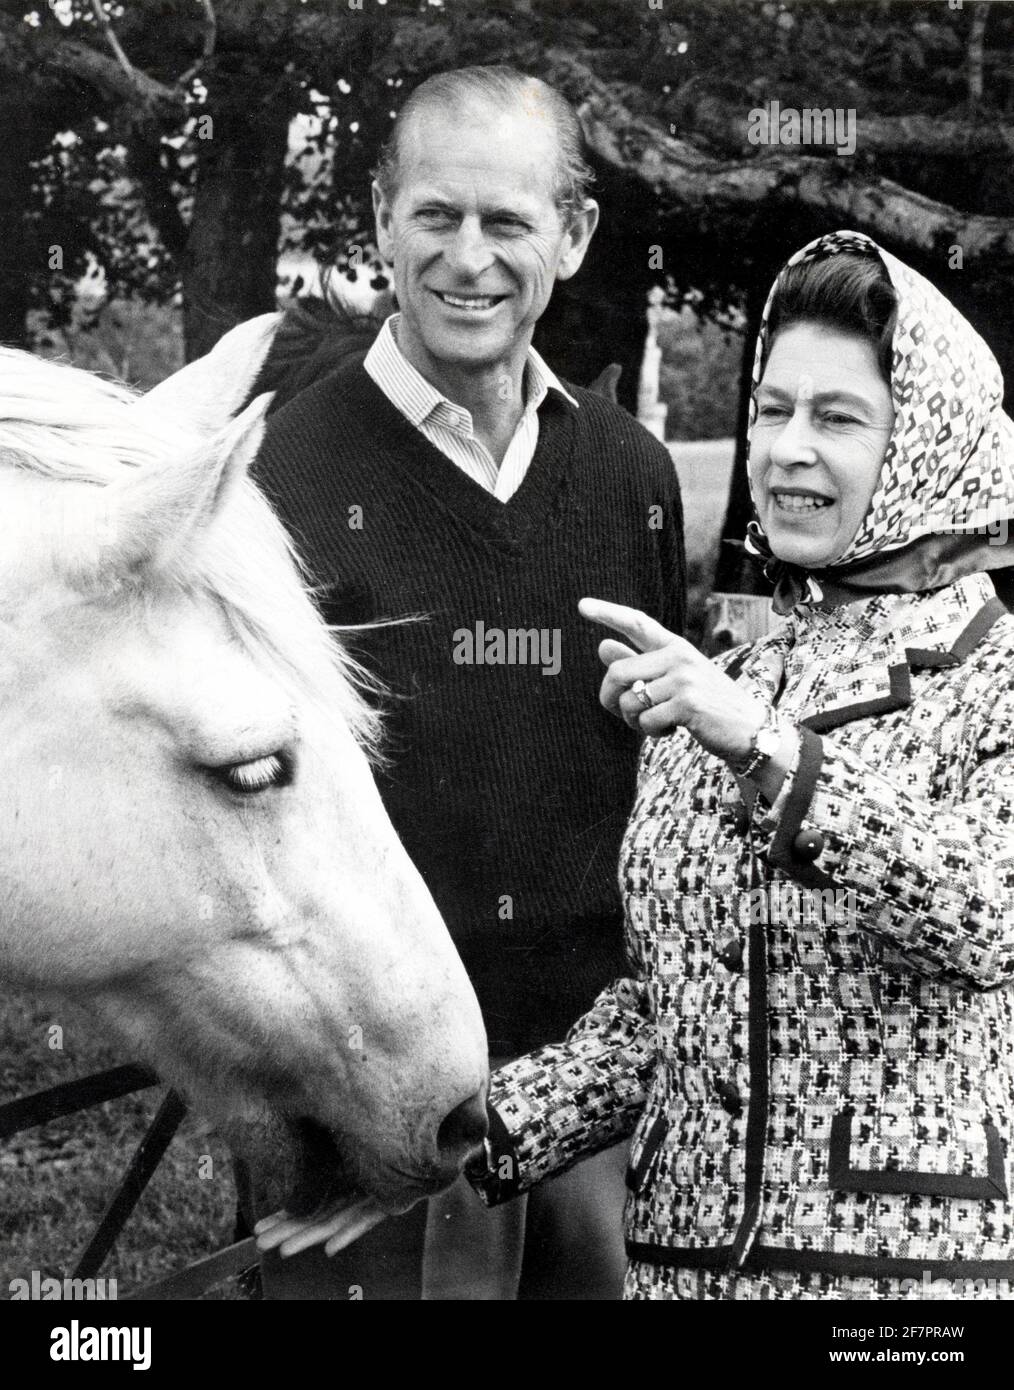 Oct. 1, 1972 - Balmoral, England, U.K. - The elder daughter of King George VI and Queen Elizabeth, ELIZABETH WINDSOR (named Elizabeth II) became Queen at the age of 25, and has reigned through more than five decades of enormous social change and development. PICTURED: QUEEN ELIZABETH II and PRINCE PHILIP pictured at Balmoral Castle. (Credit Image: © Keystone Press Agency/Keystone USA via ZUMAPRESS.com) Stock Photo